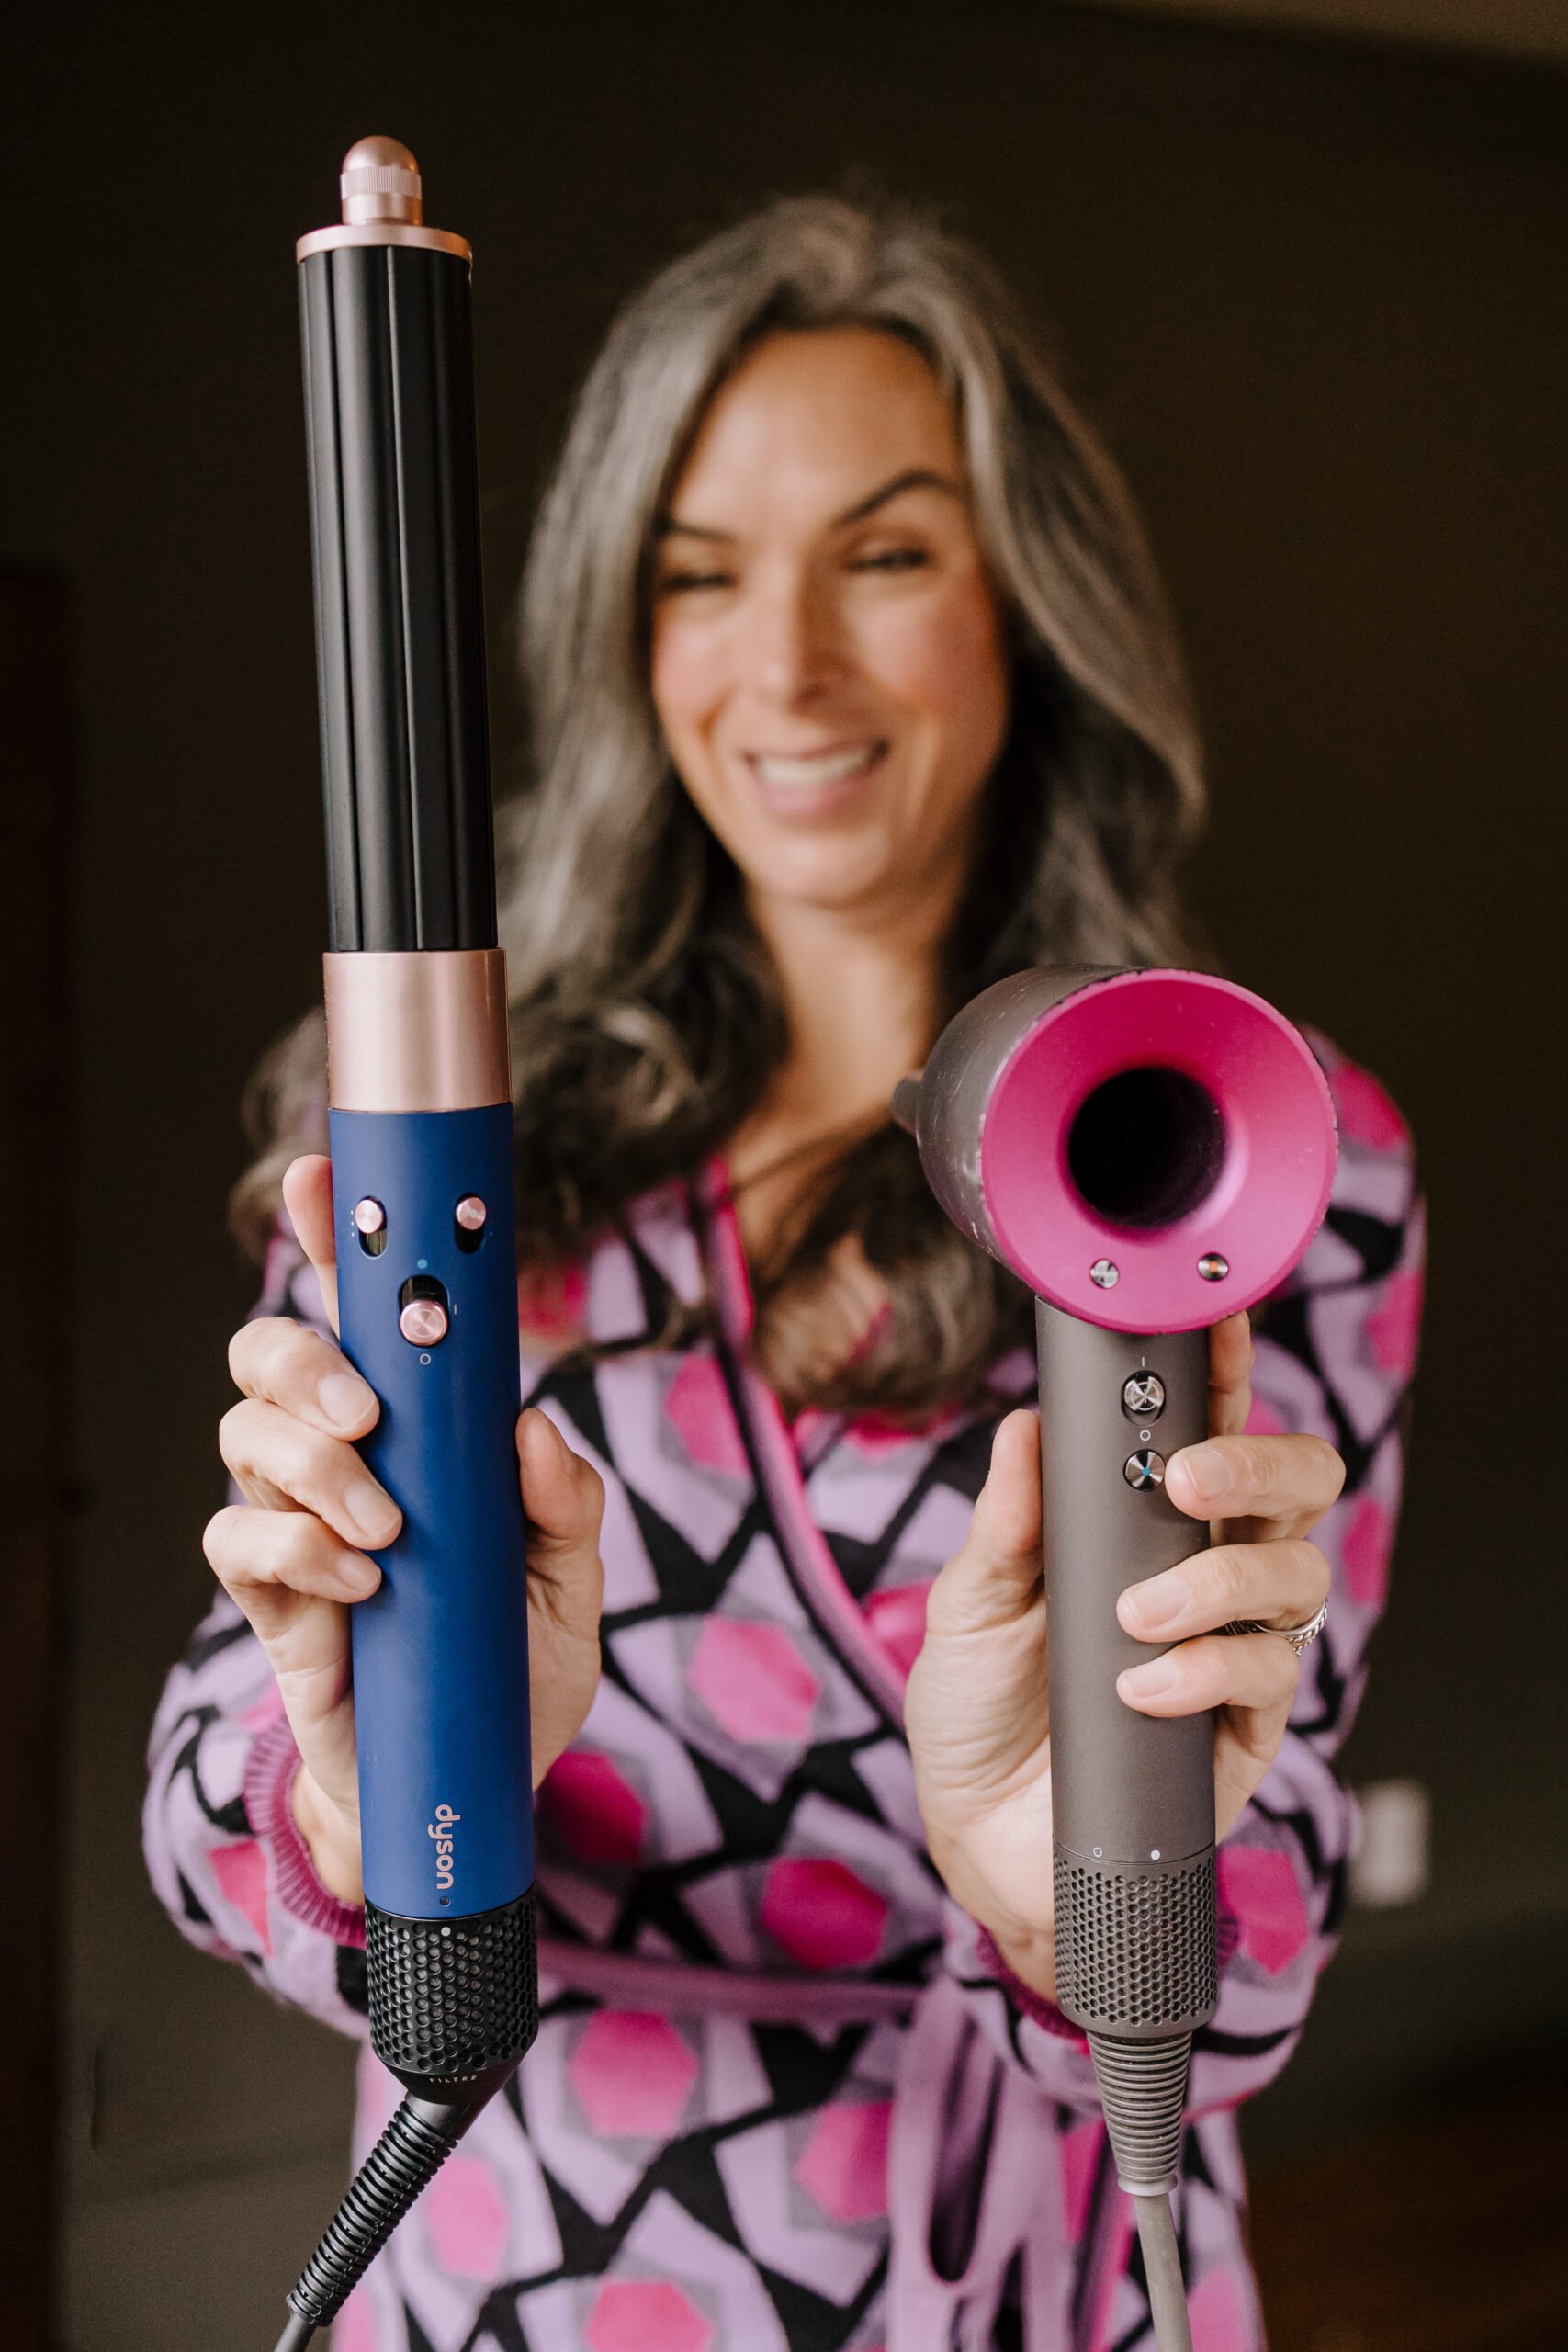 Lisa holds up the Dyson Hair Dryer and Airwrap to compare.